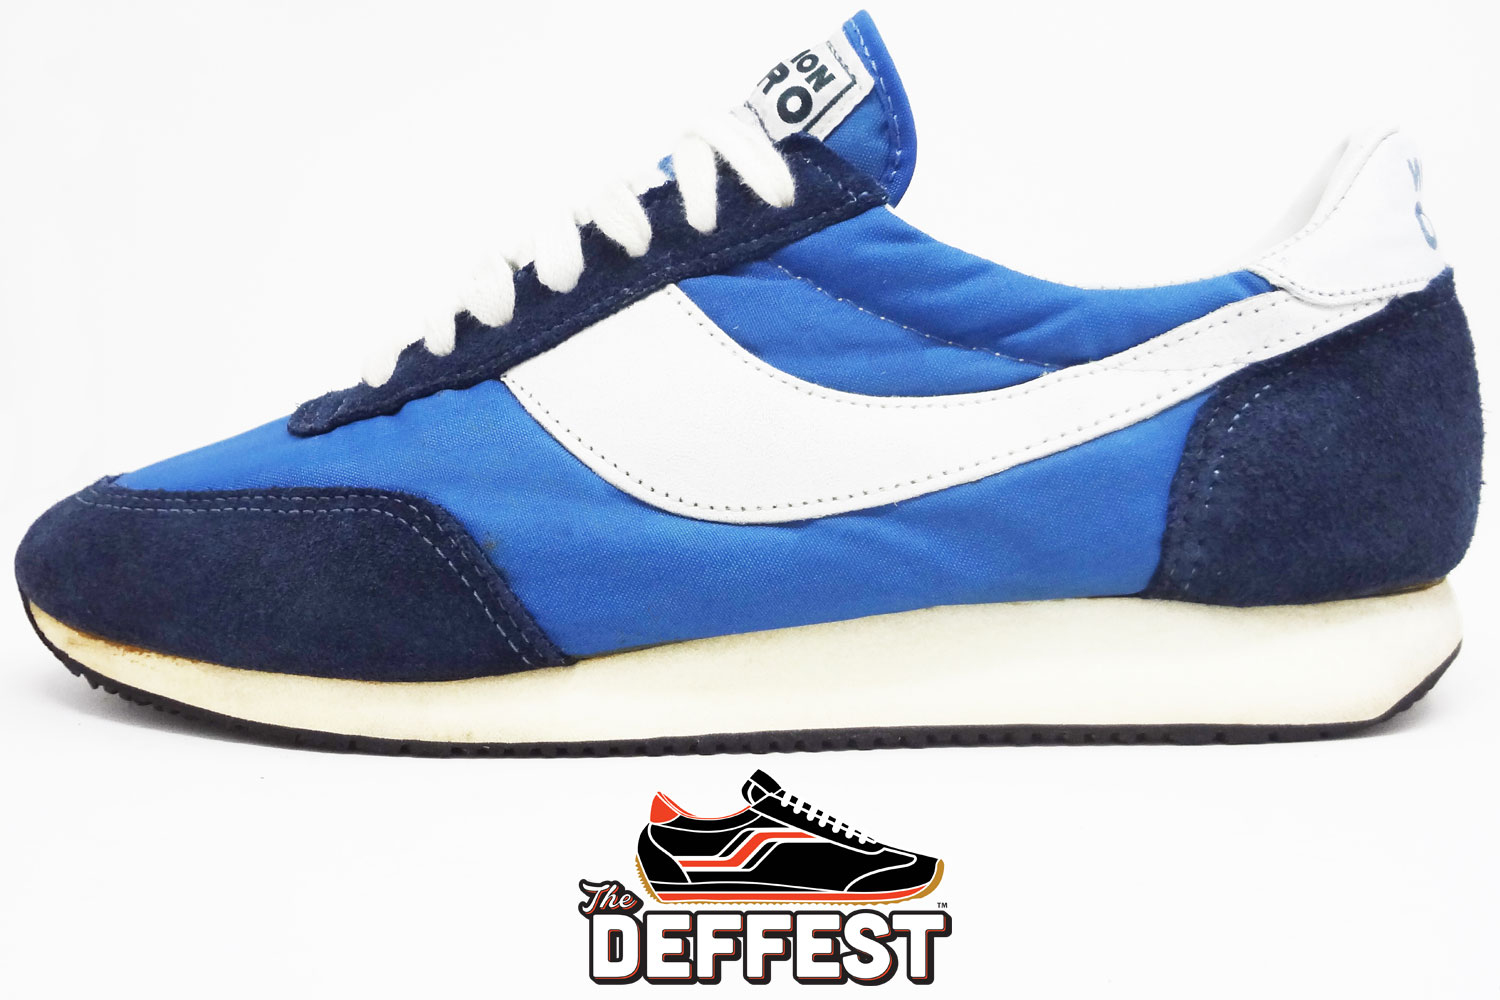 Old school Action Pro 1980s vintage sneakers side profile view @ The Deffest